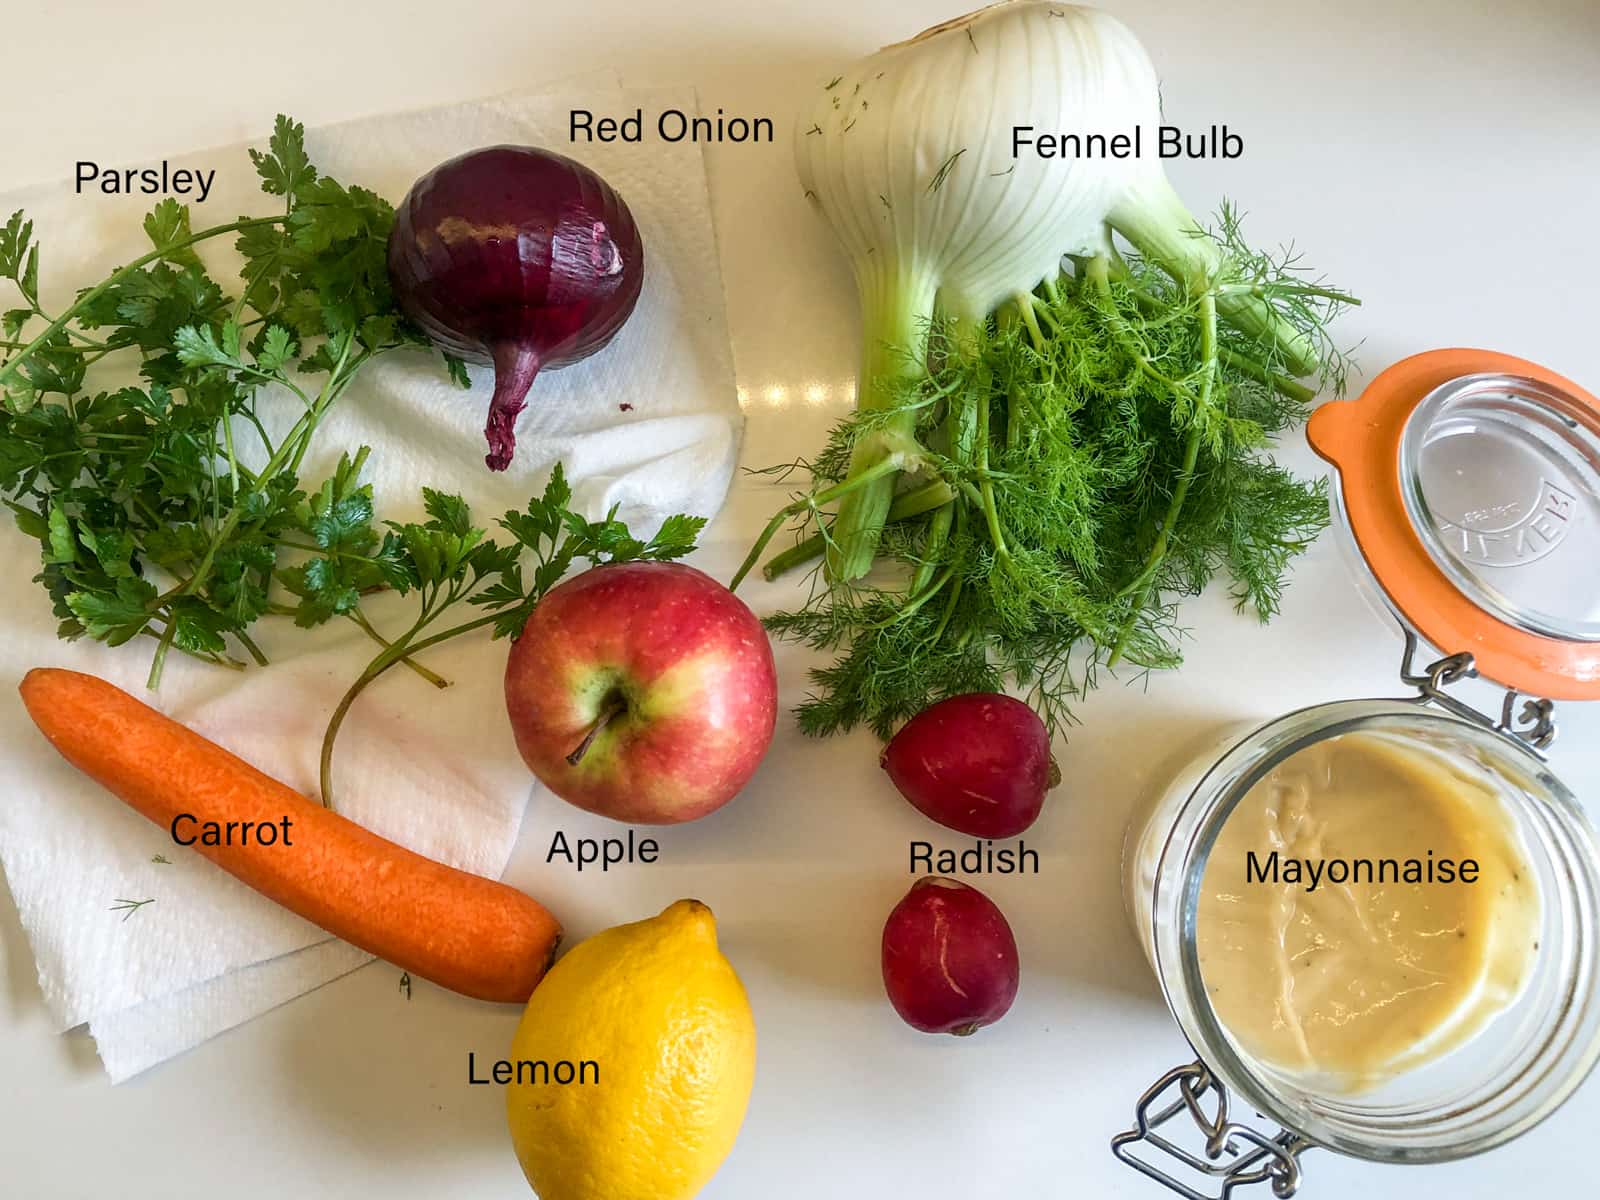 Ingredients laid out and labelled to make a coleslaw.